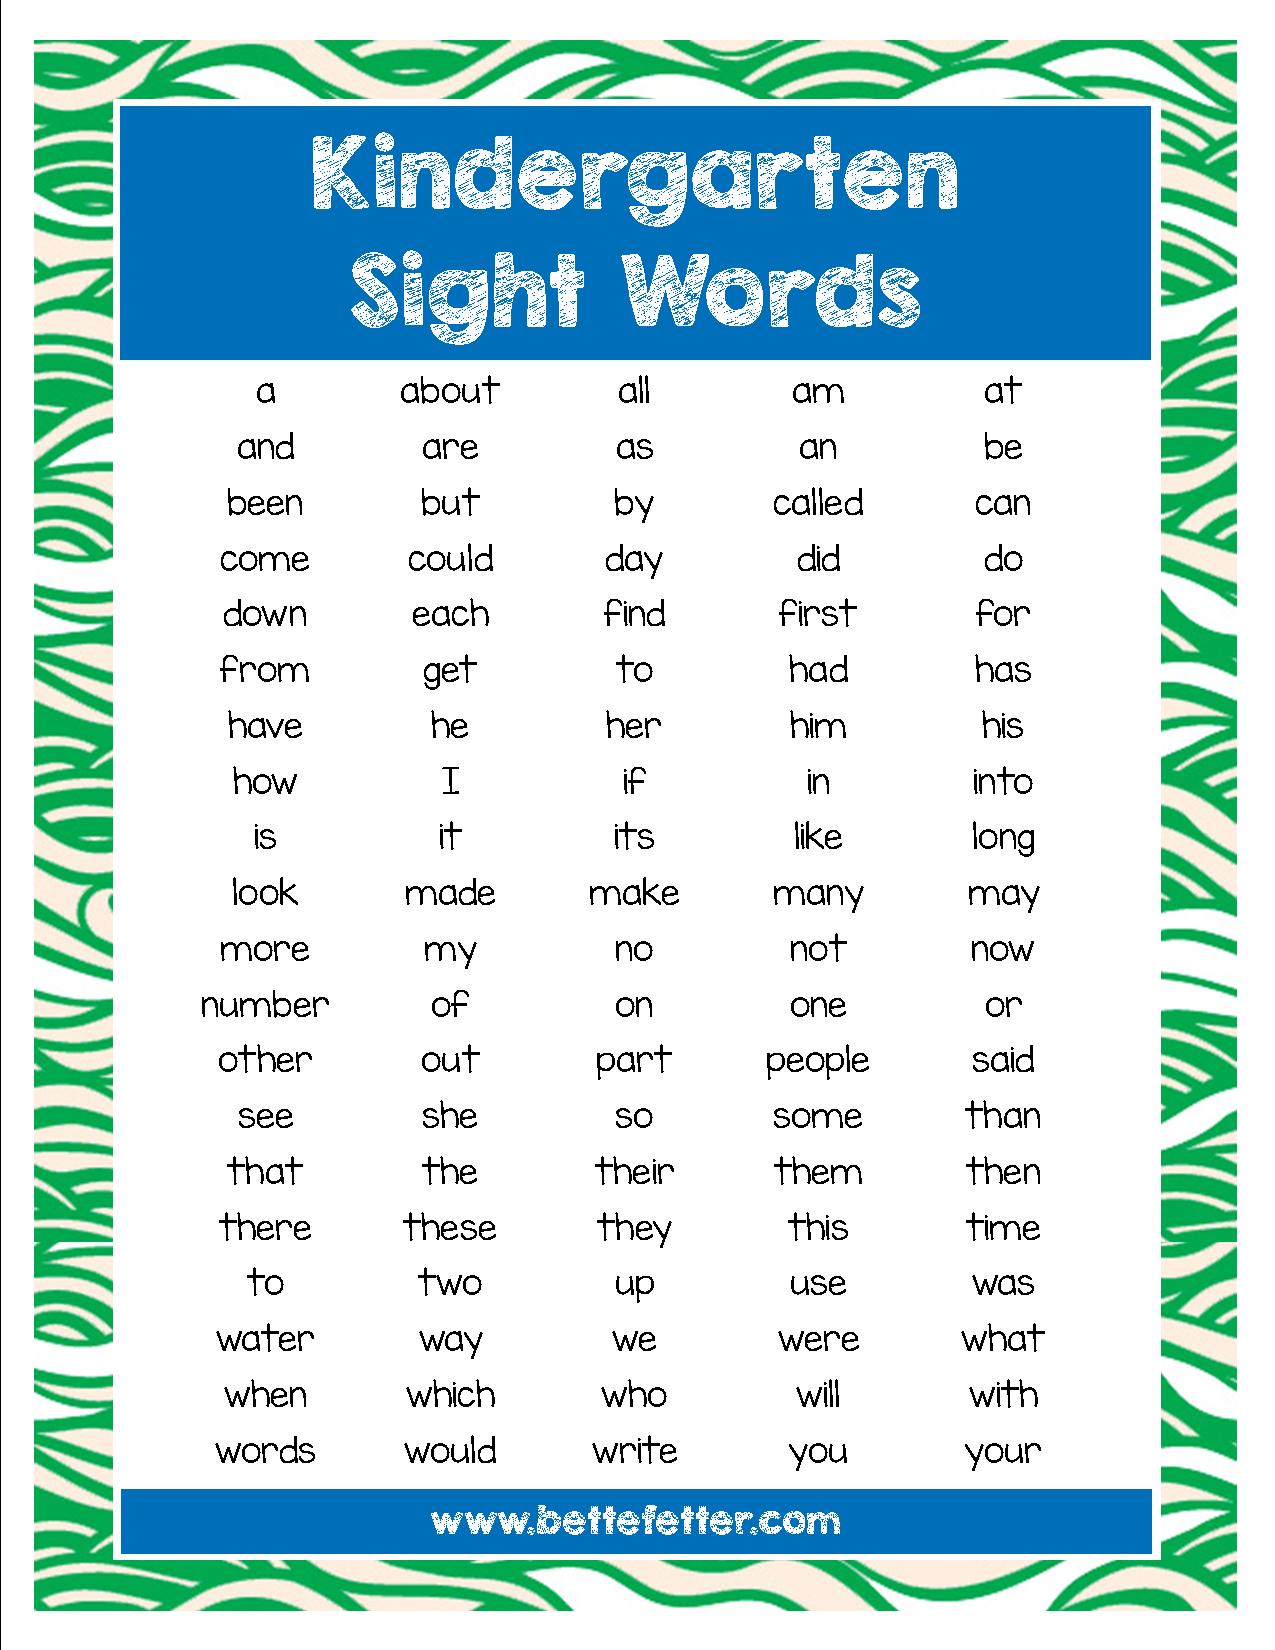 activities for kids |sight words | reading and writing tips | visual